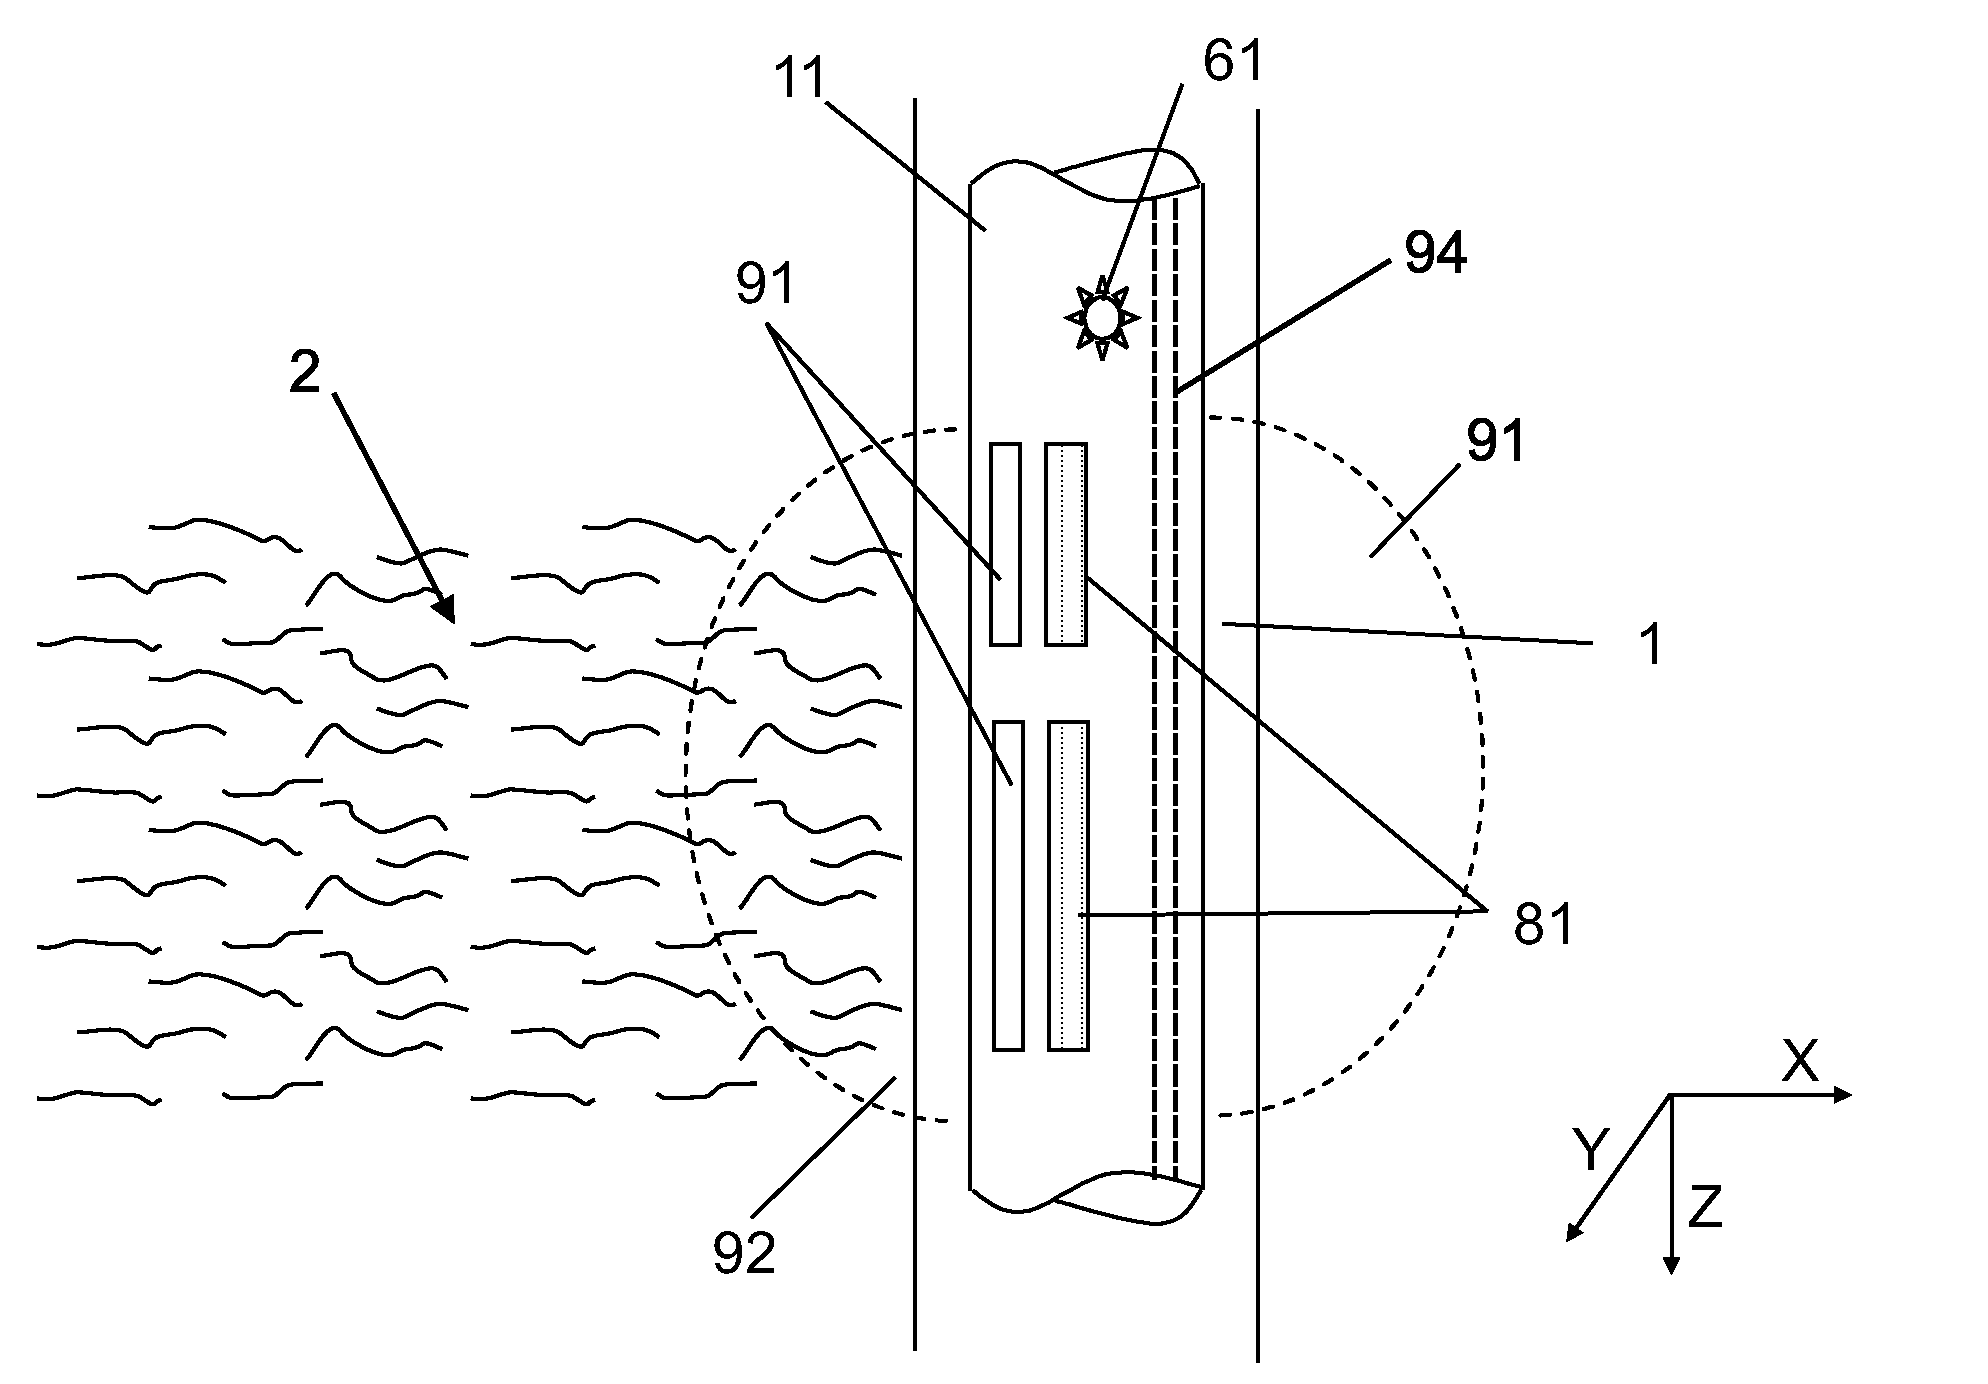 Materials for use as structural neutron moderators in well logging tools